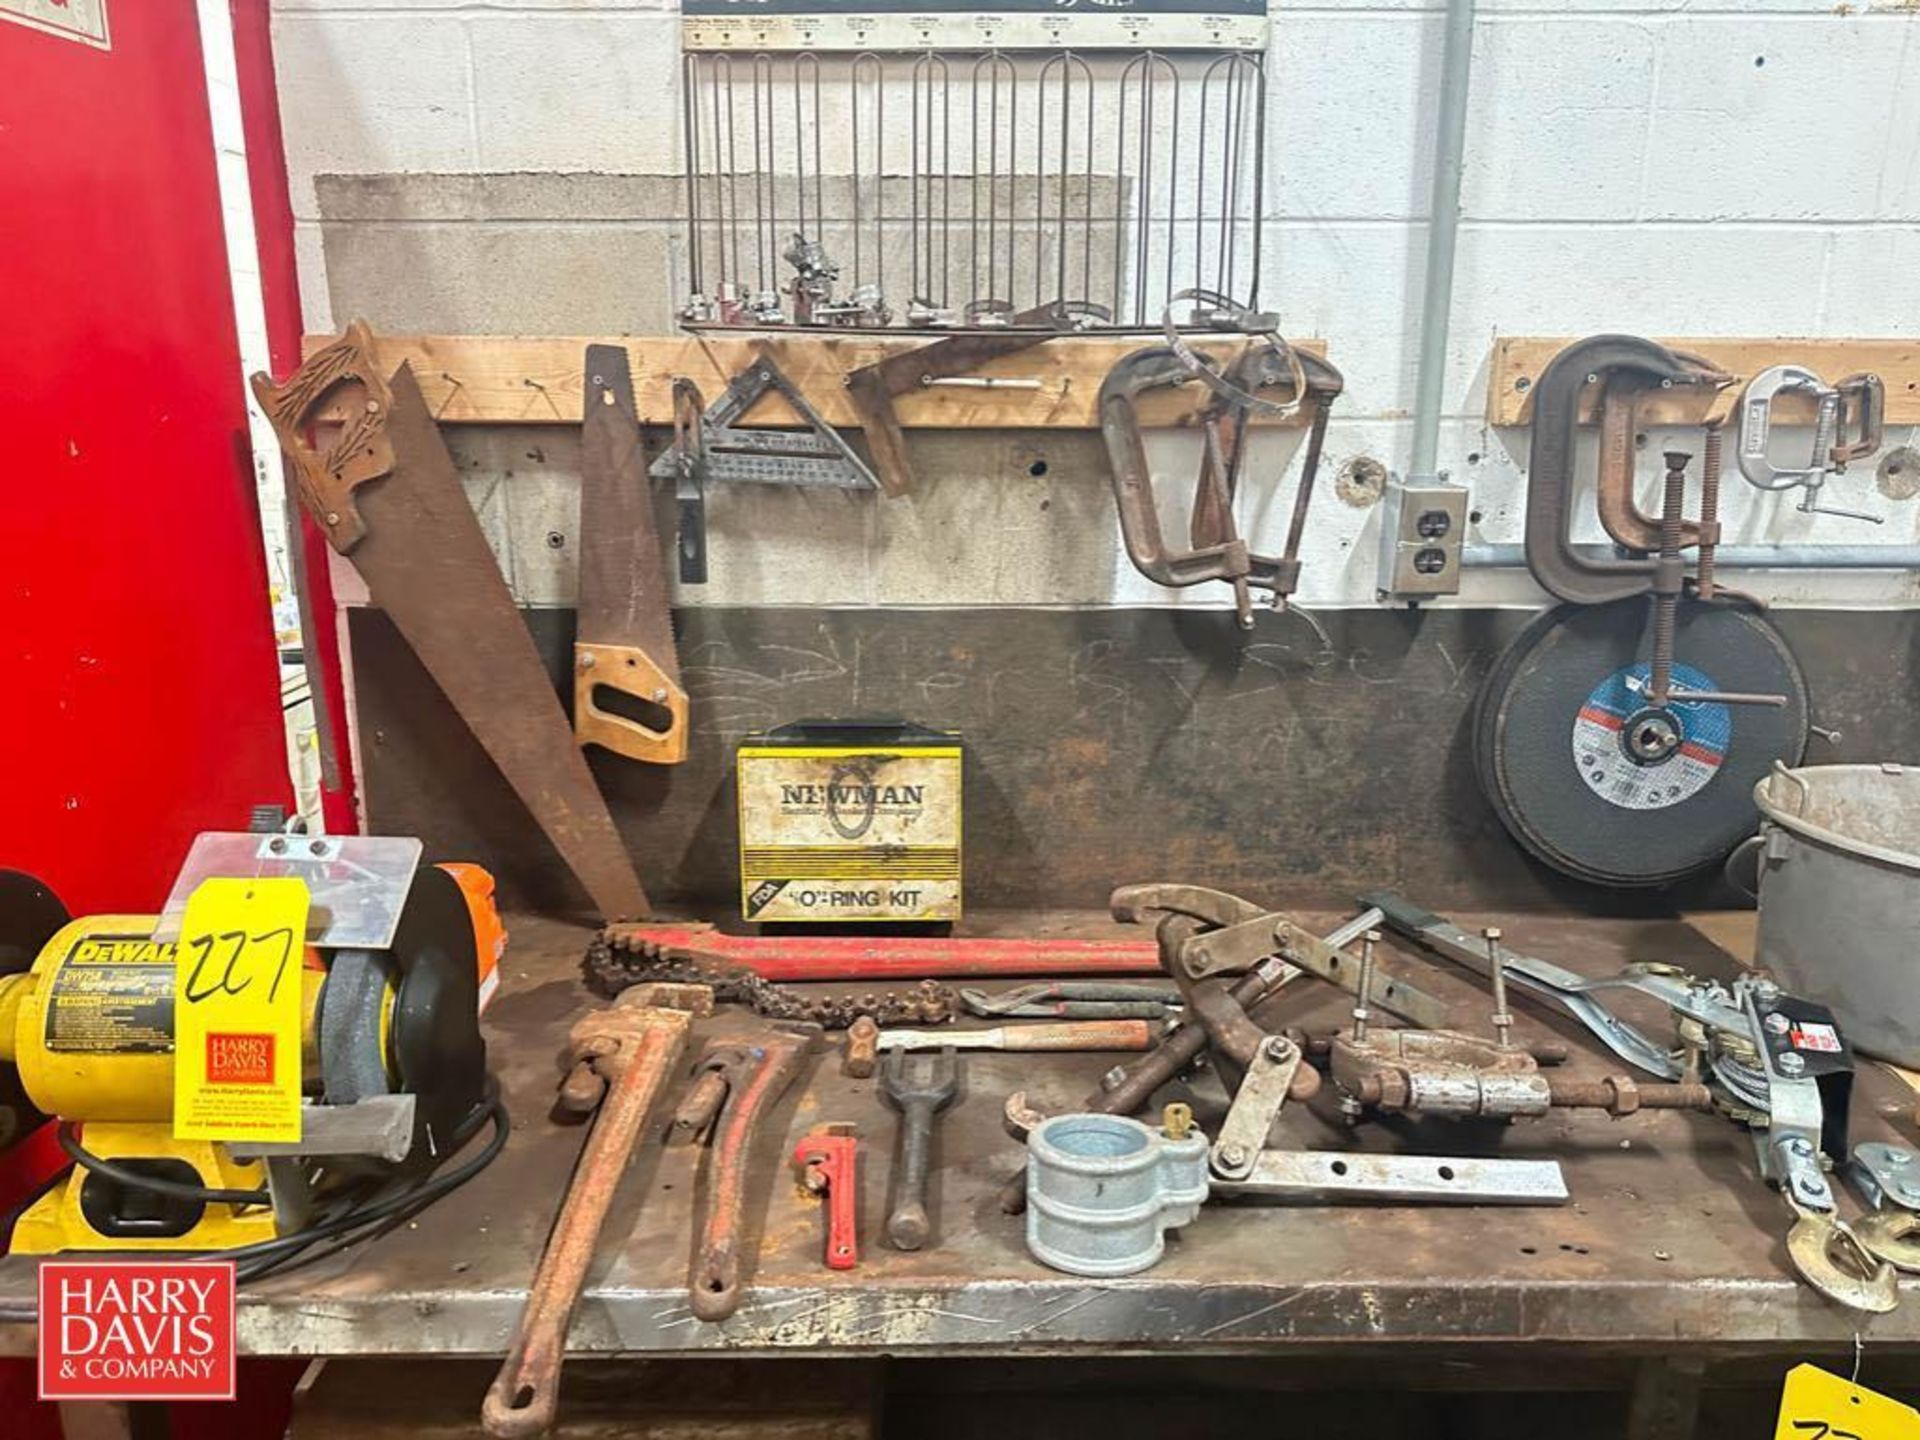 Assorted Hand Saws, Wrenches, Clamps, Grinding Wheels, Tap and Die Set, Bench Vice, Drive and Steel - Image 2 of 3